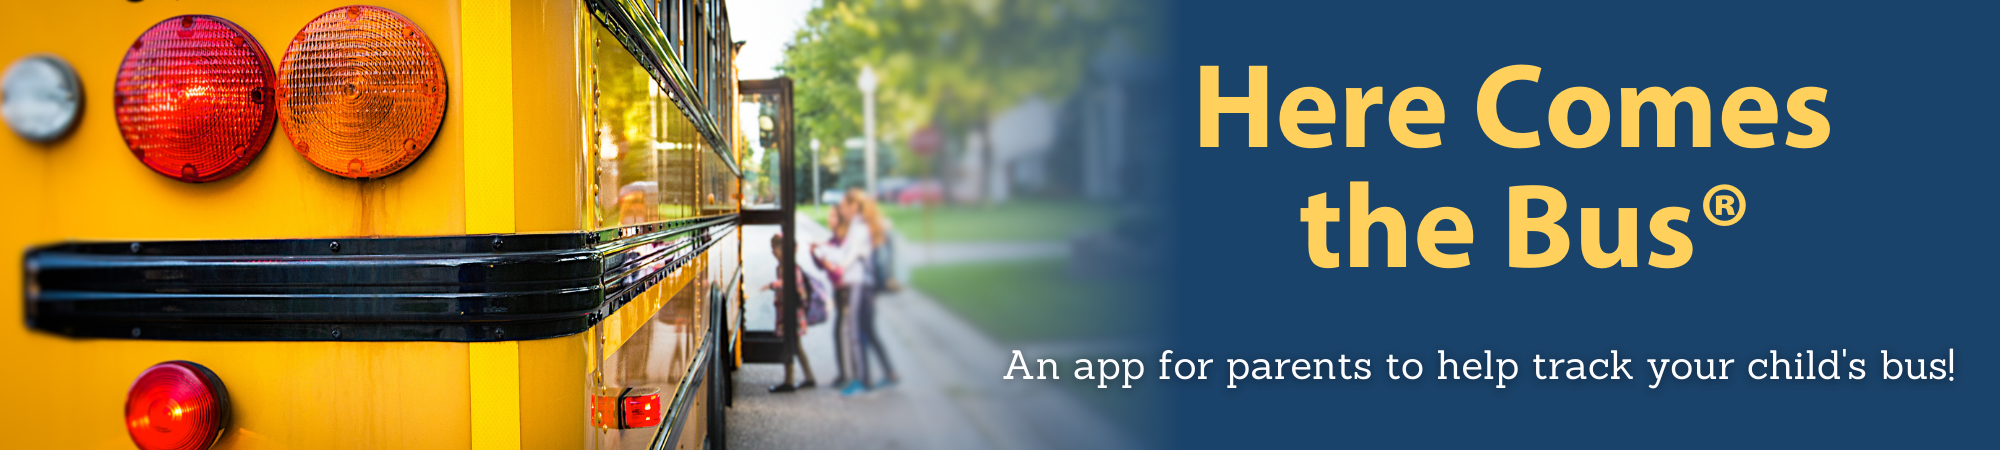 Here Comes The Bus - An app for parents to help track your child's bus!  Click for more info